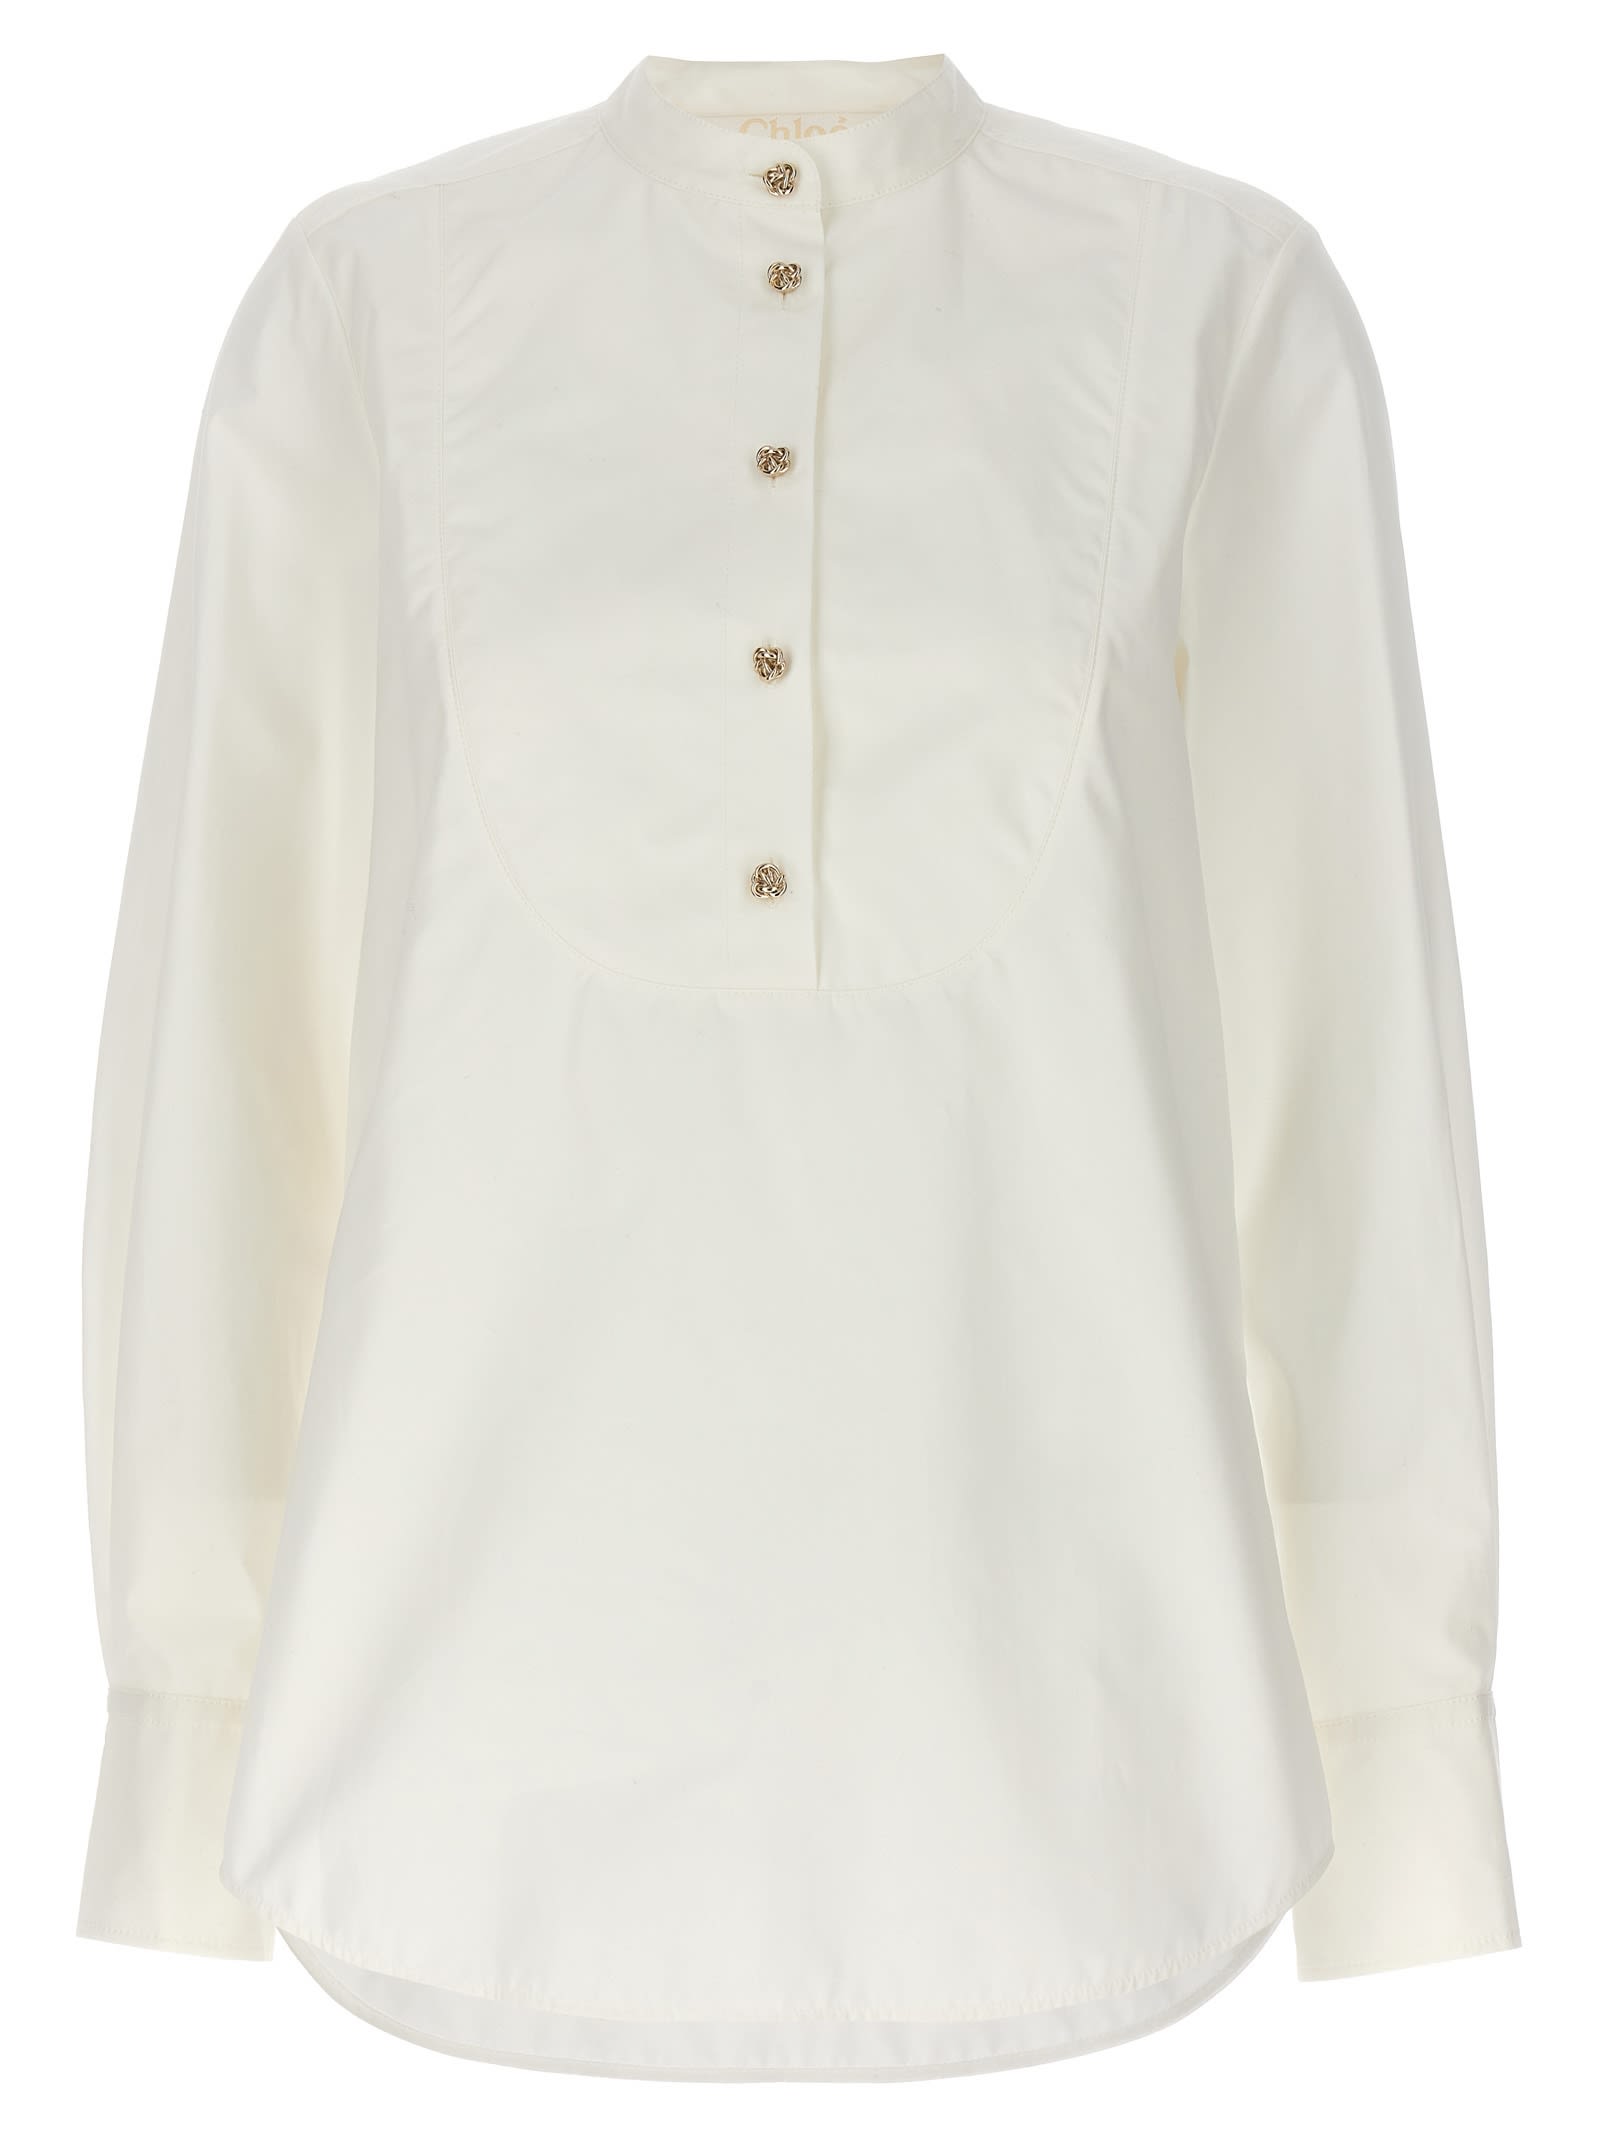 Chloé Knot Button Shirt In White